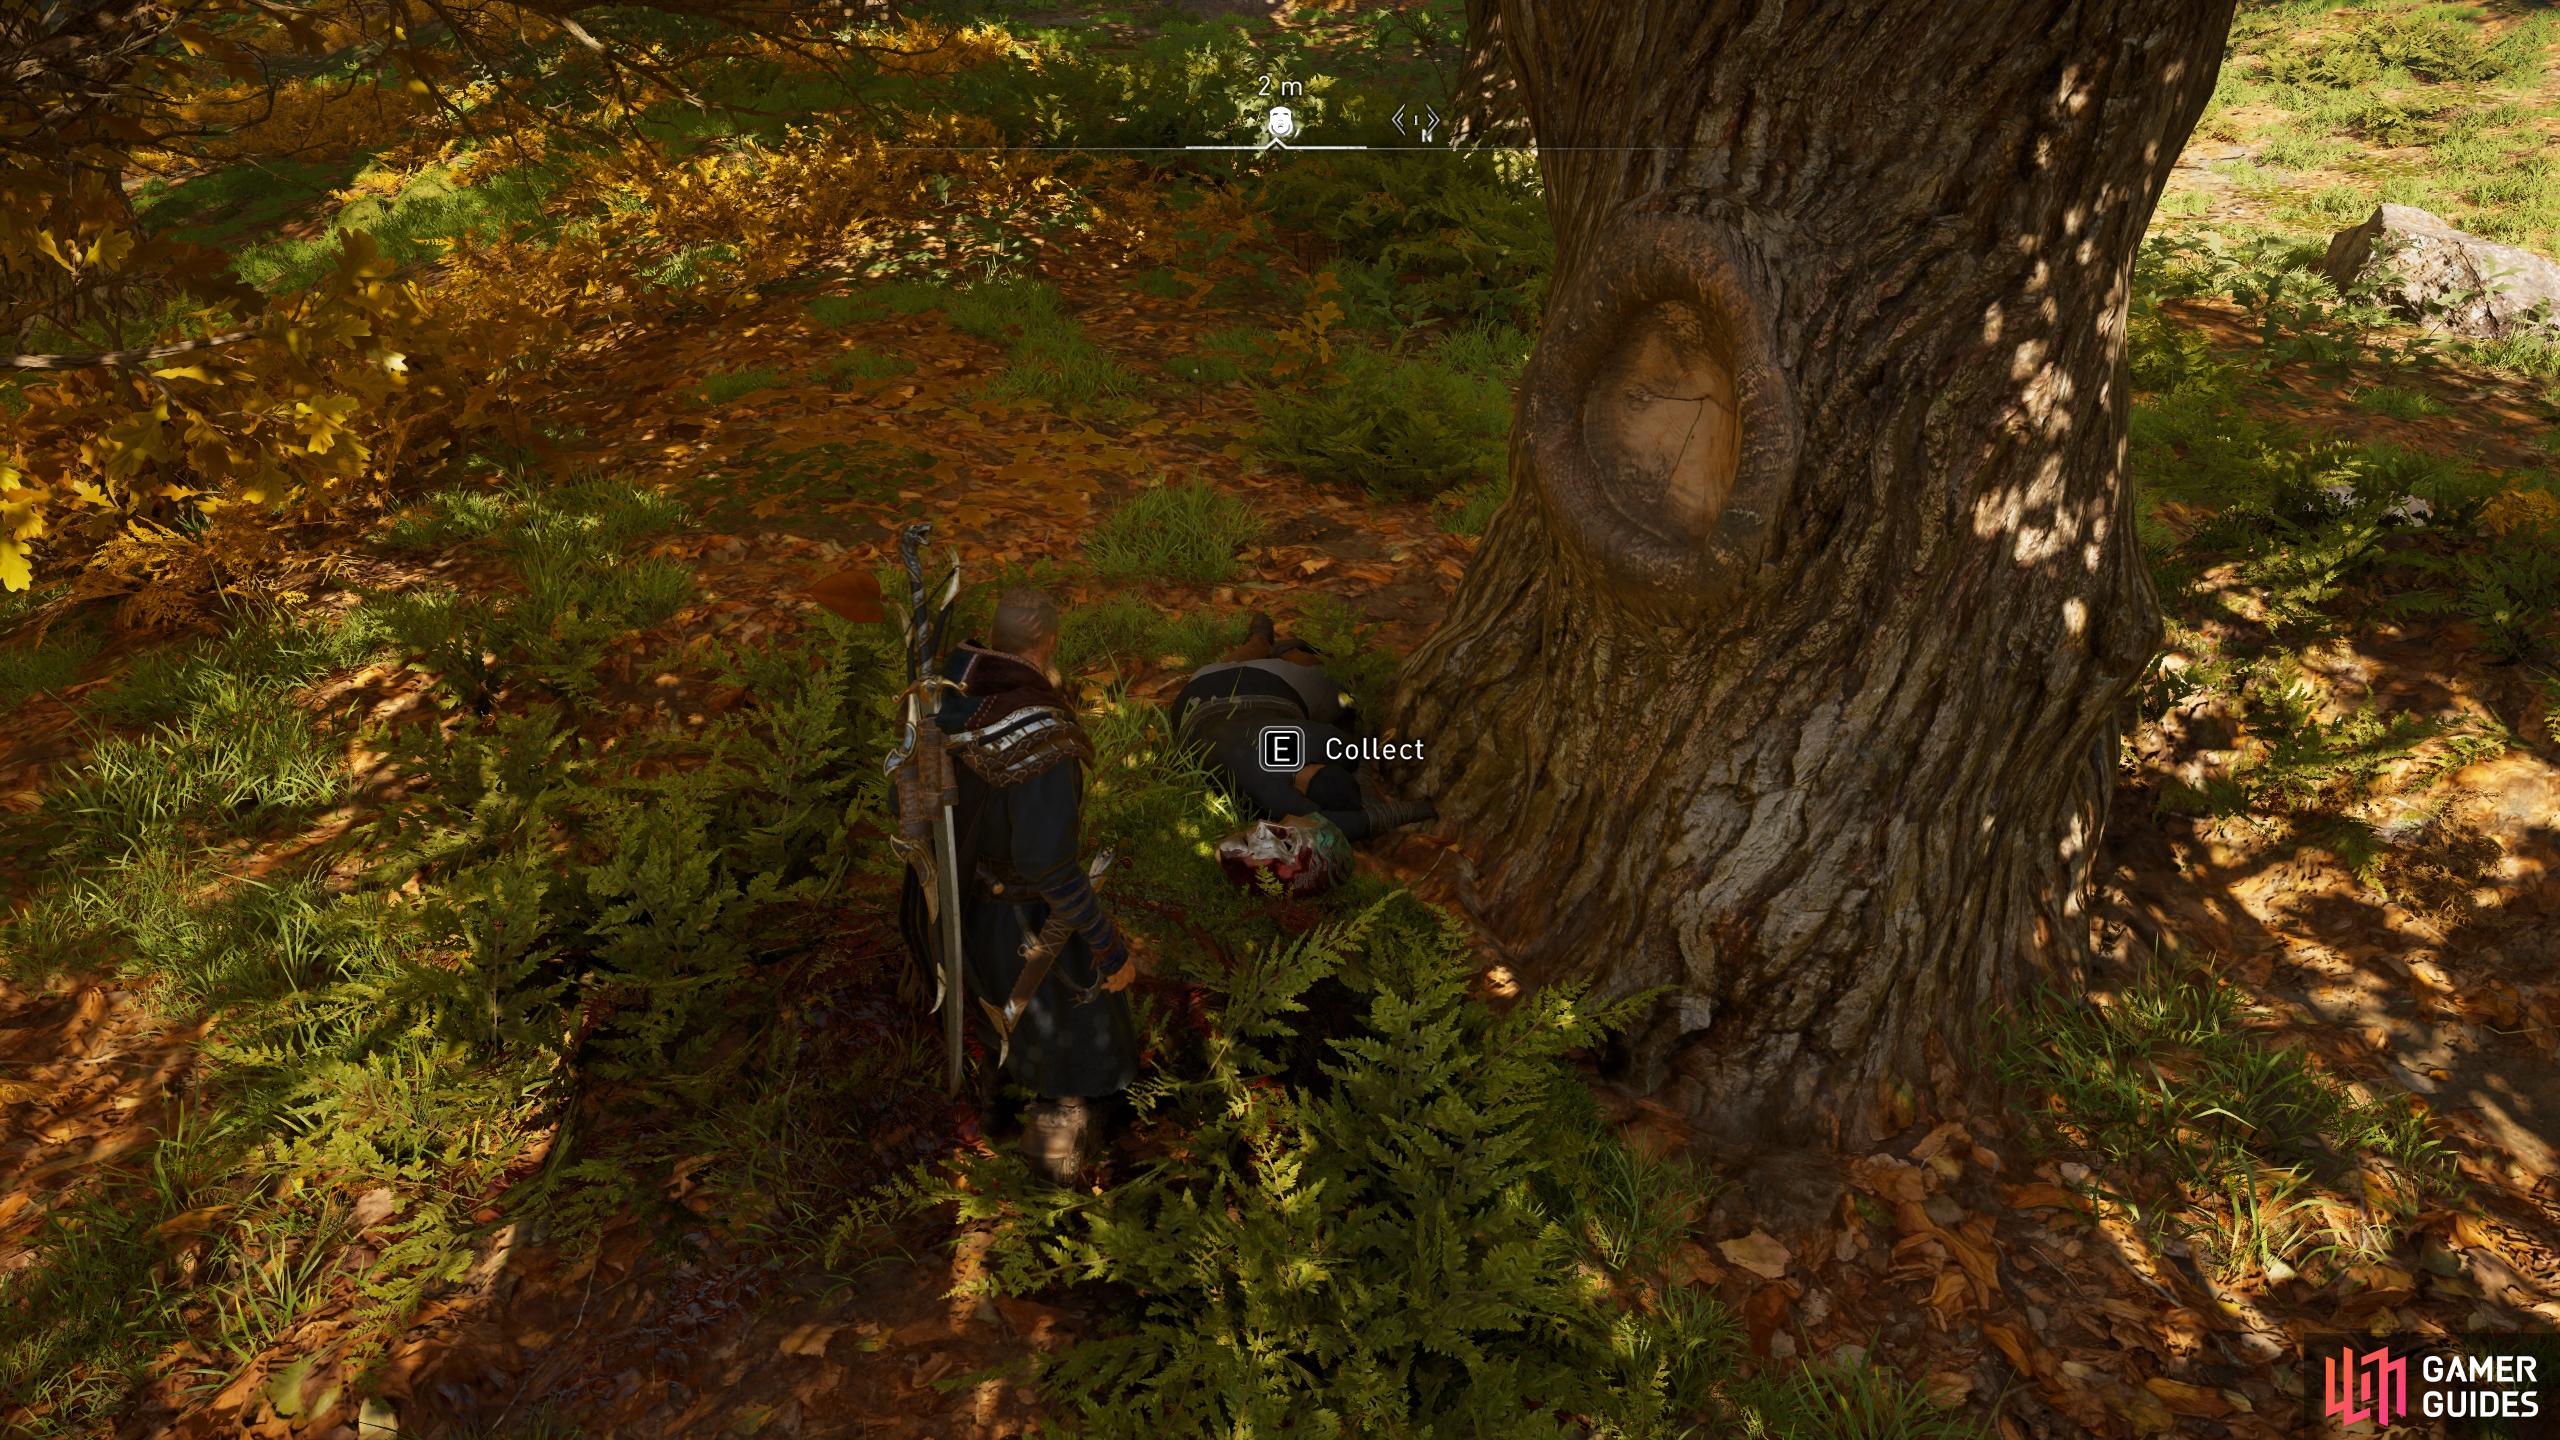 Youll be able to loot the artifact from the ground, lying beneath a tree.